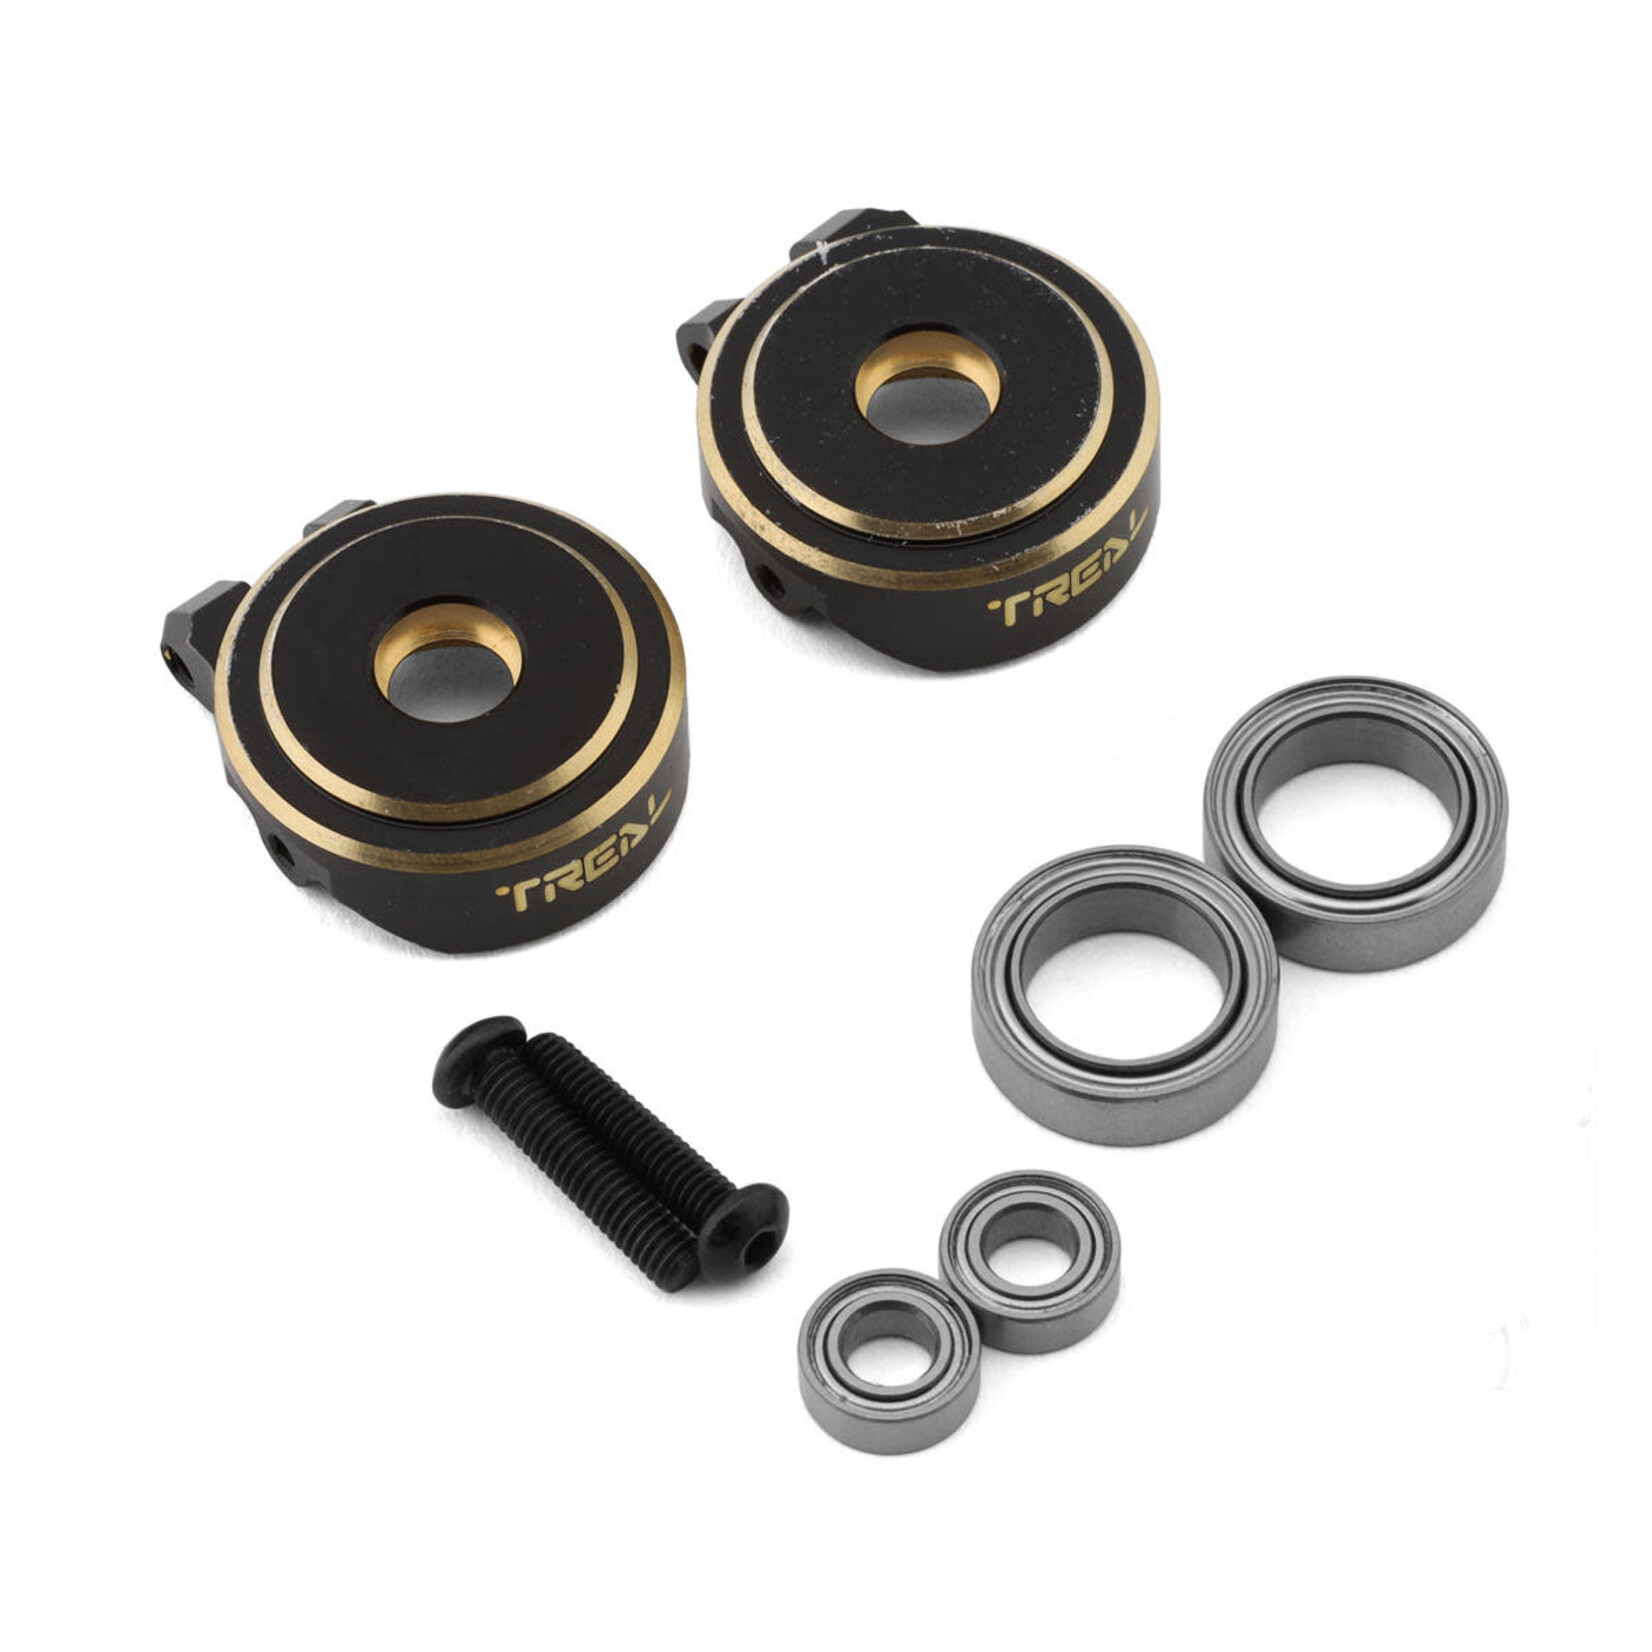 Treal Treal Hobby TRX-4M Brass Front Steering Knuckles (Black) (2) (18.6g) #X003QSERSP